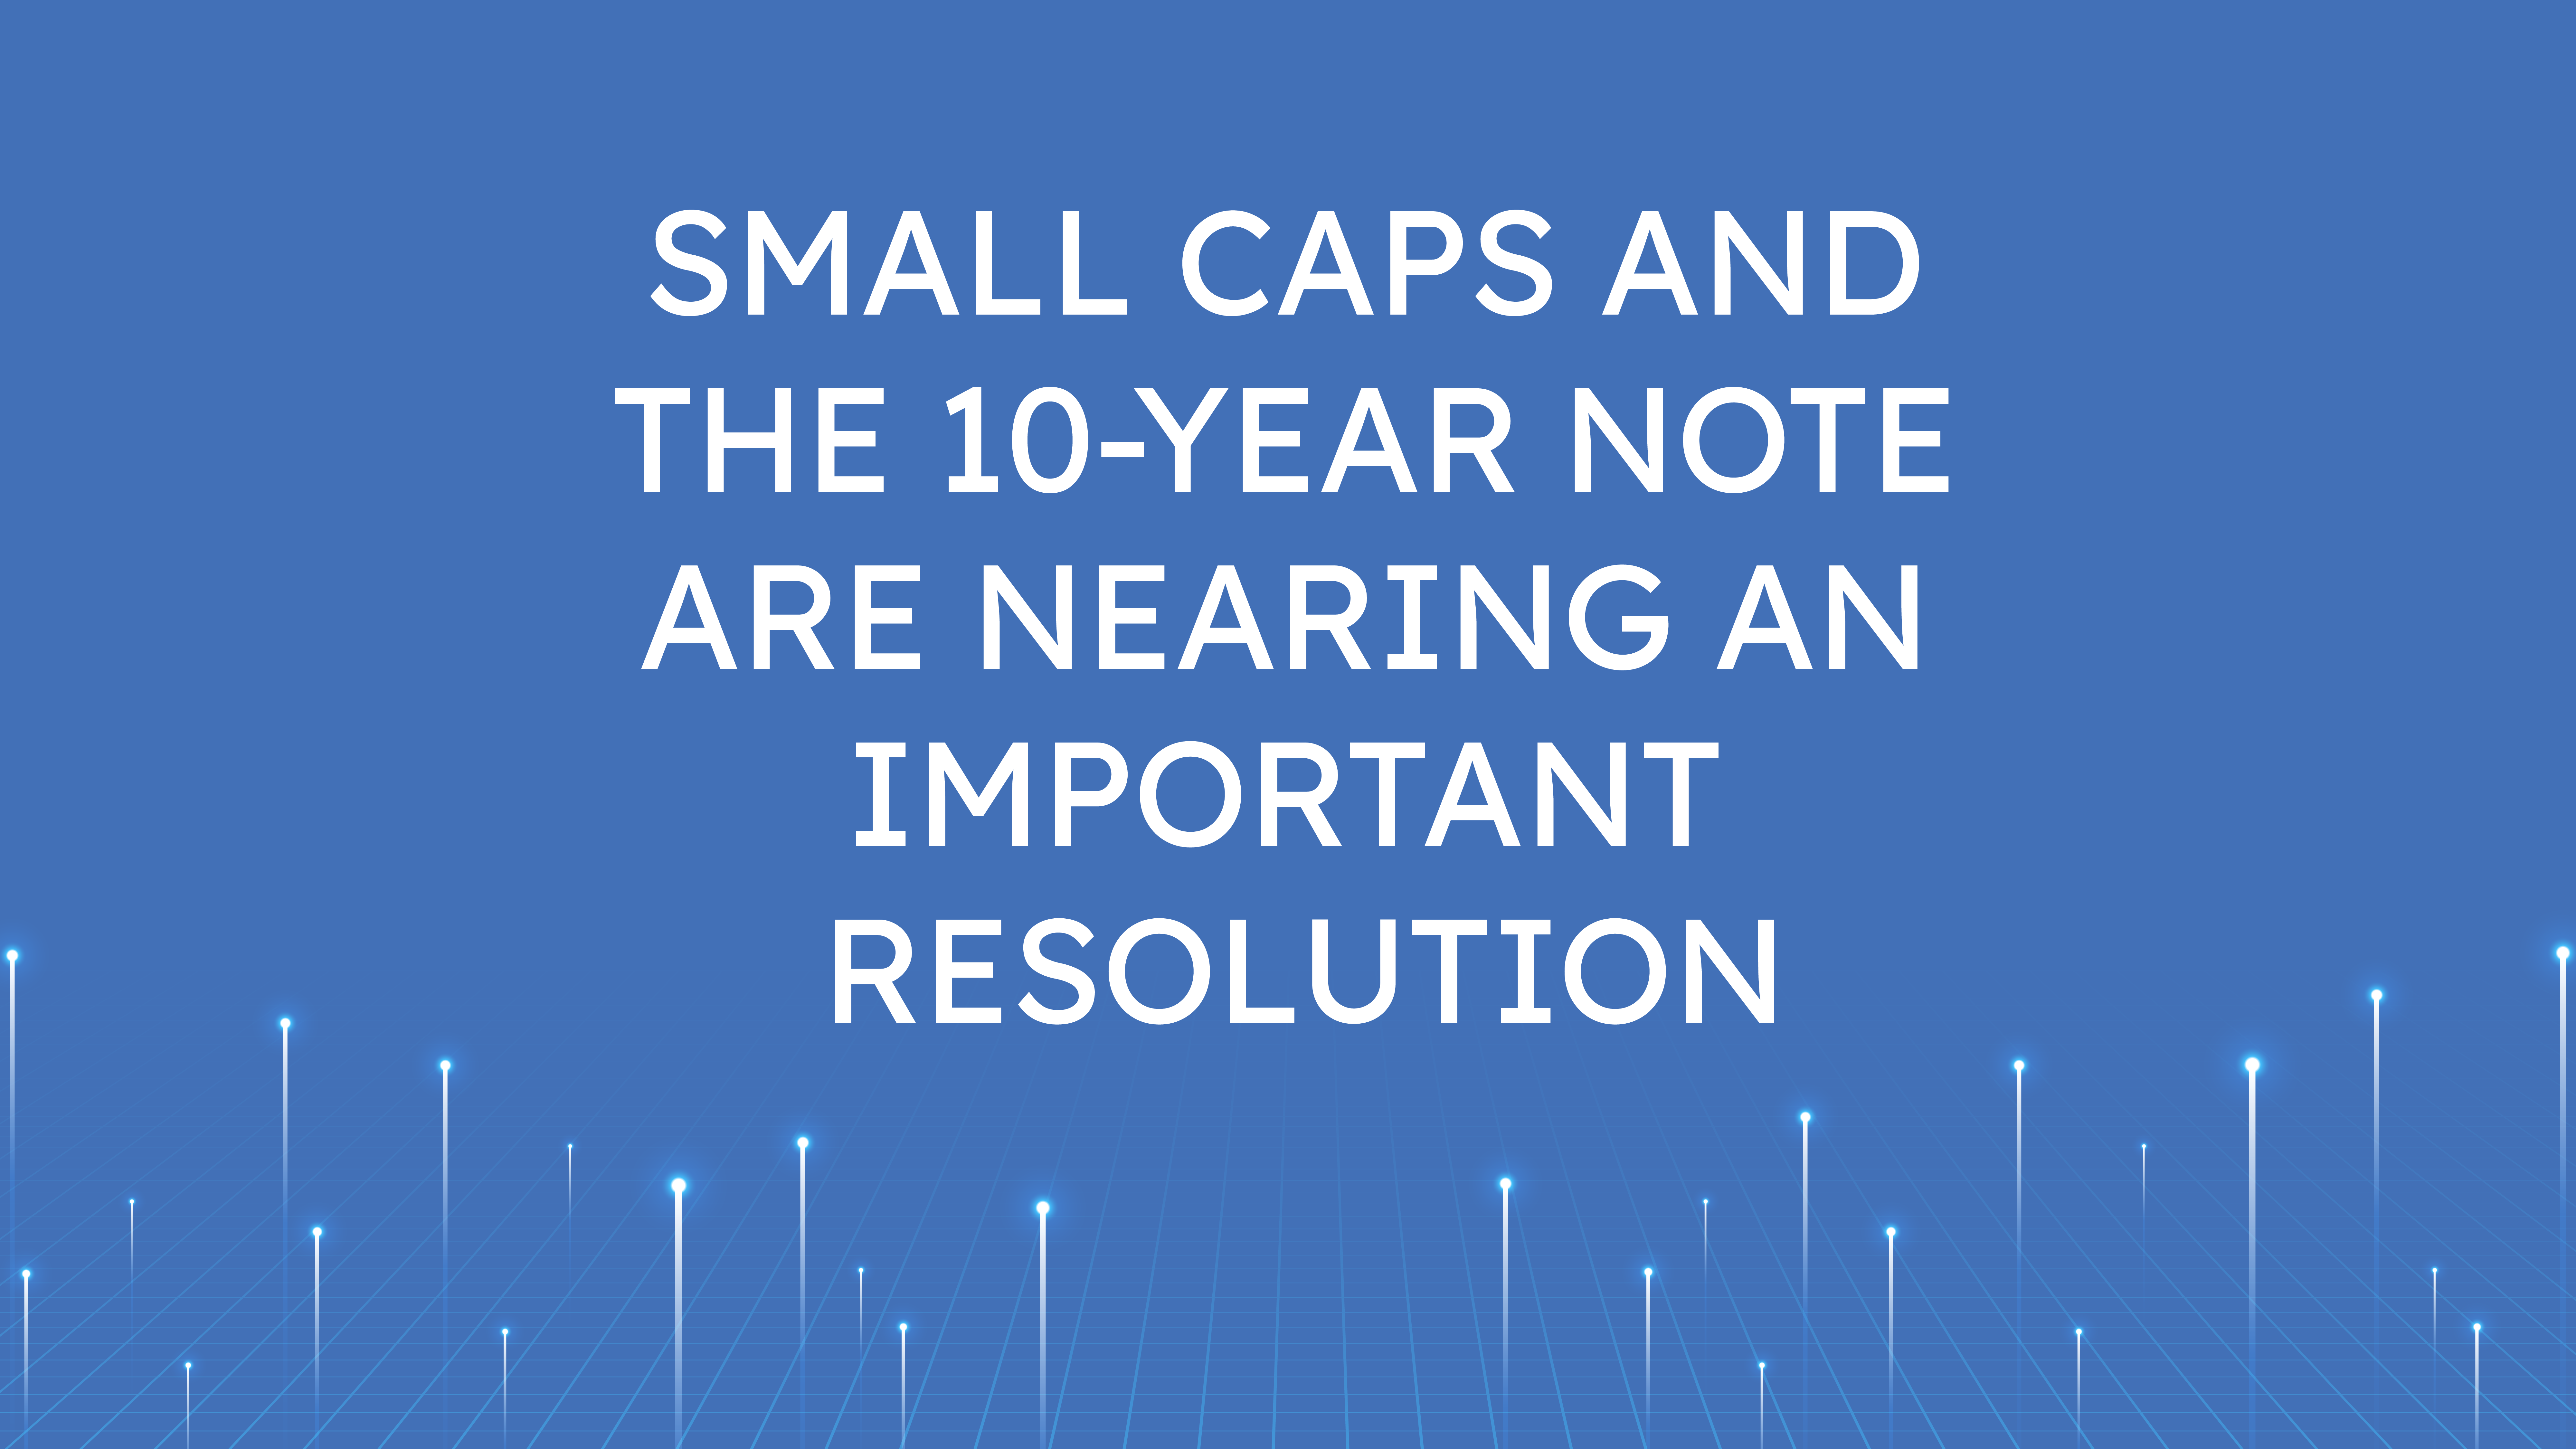 Small Caps and the 10-Year Note  are Nearing an Important Resolution